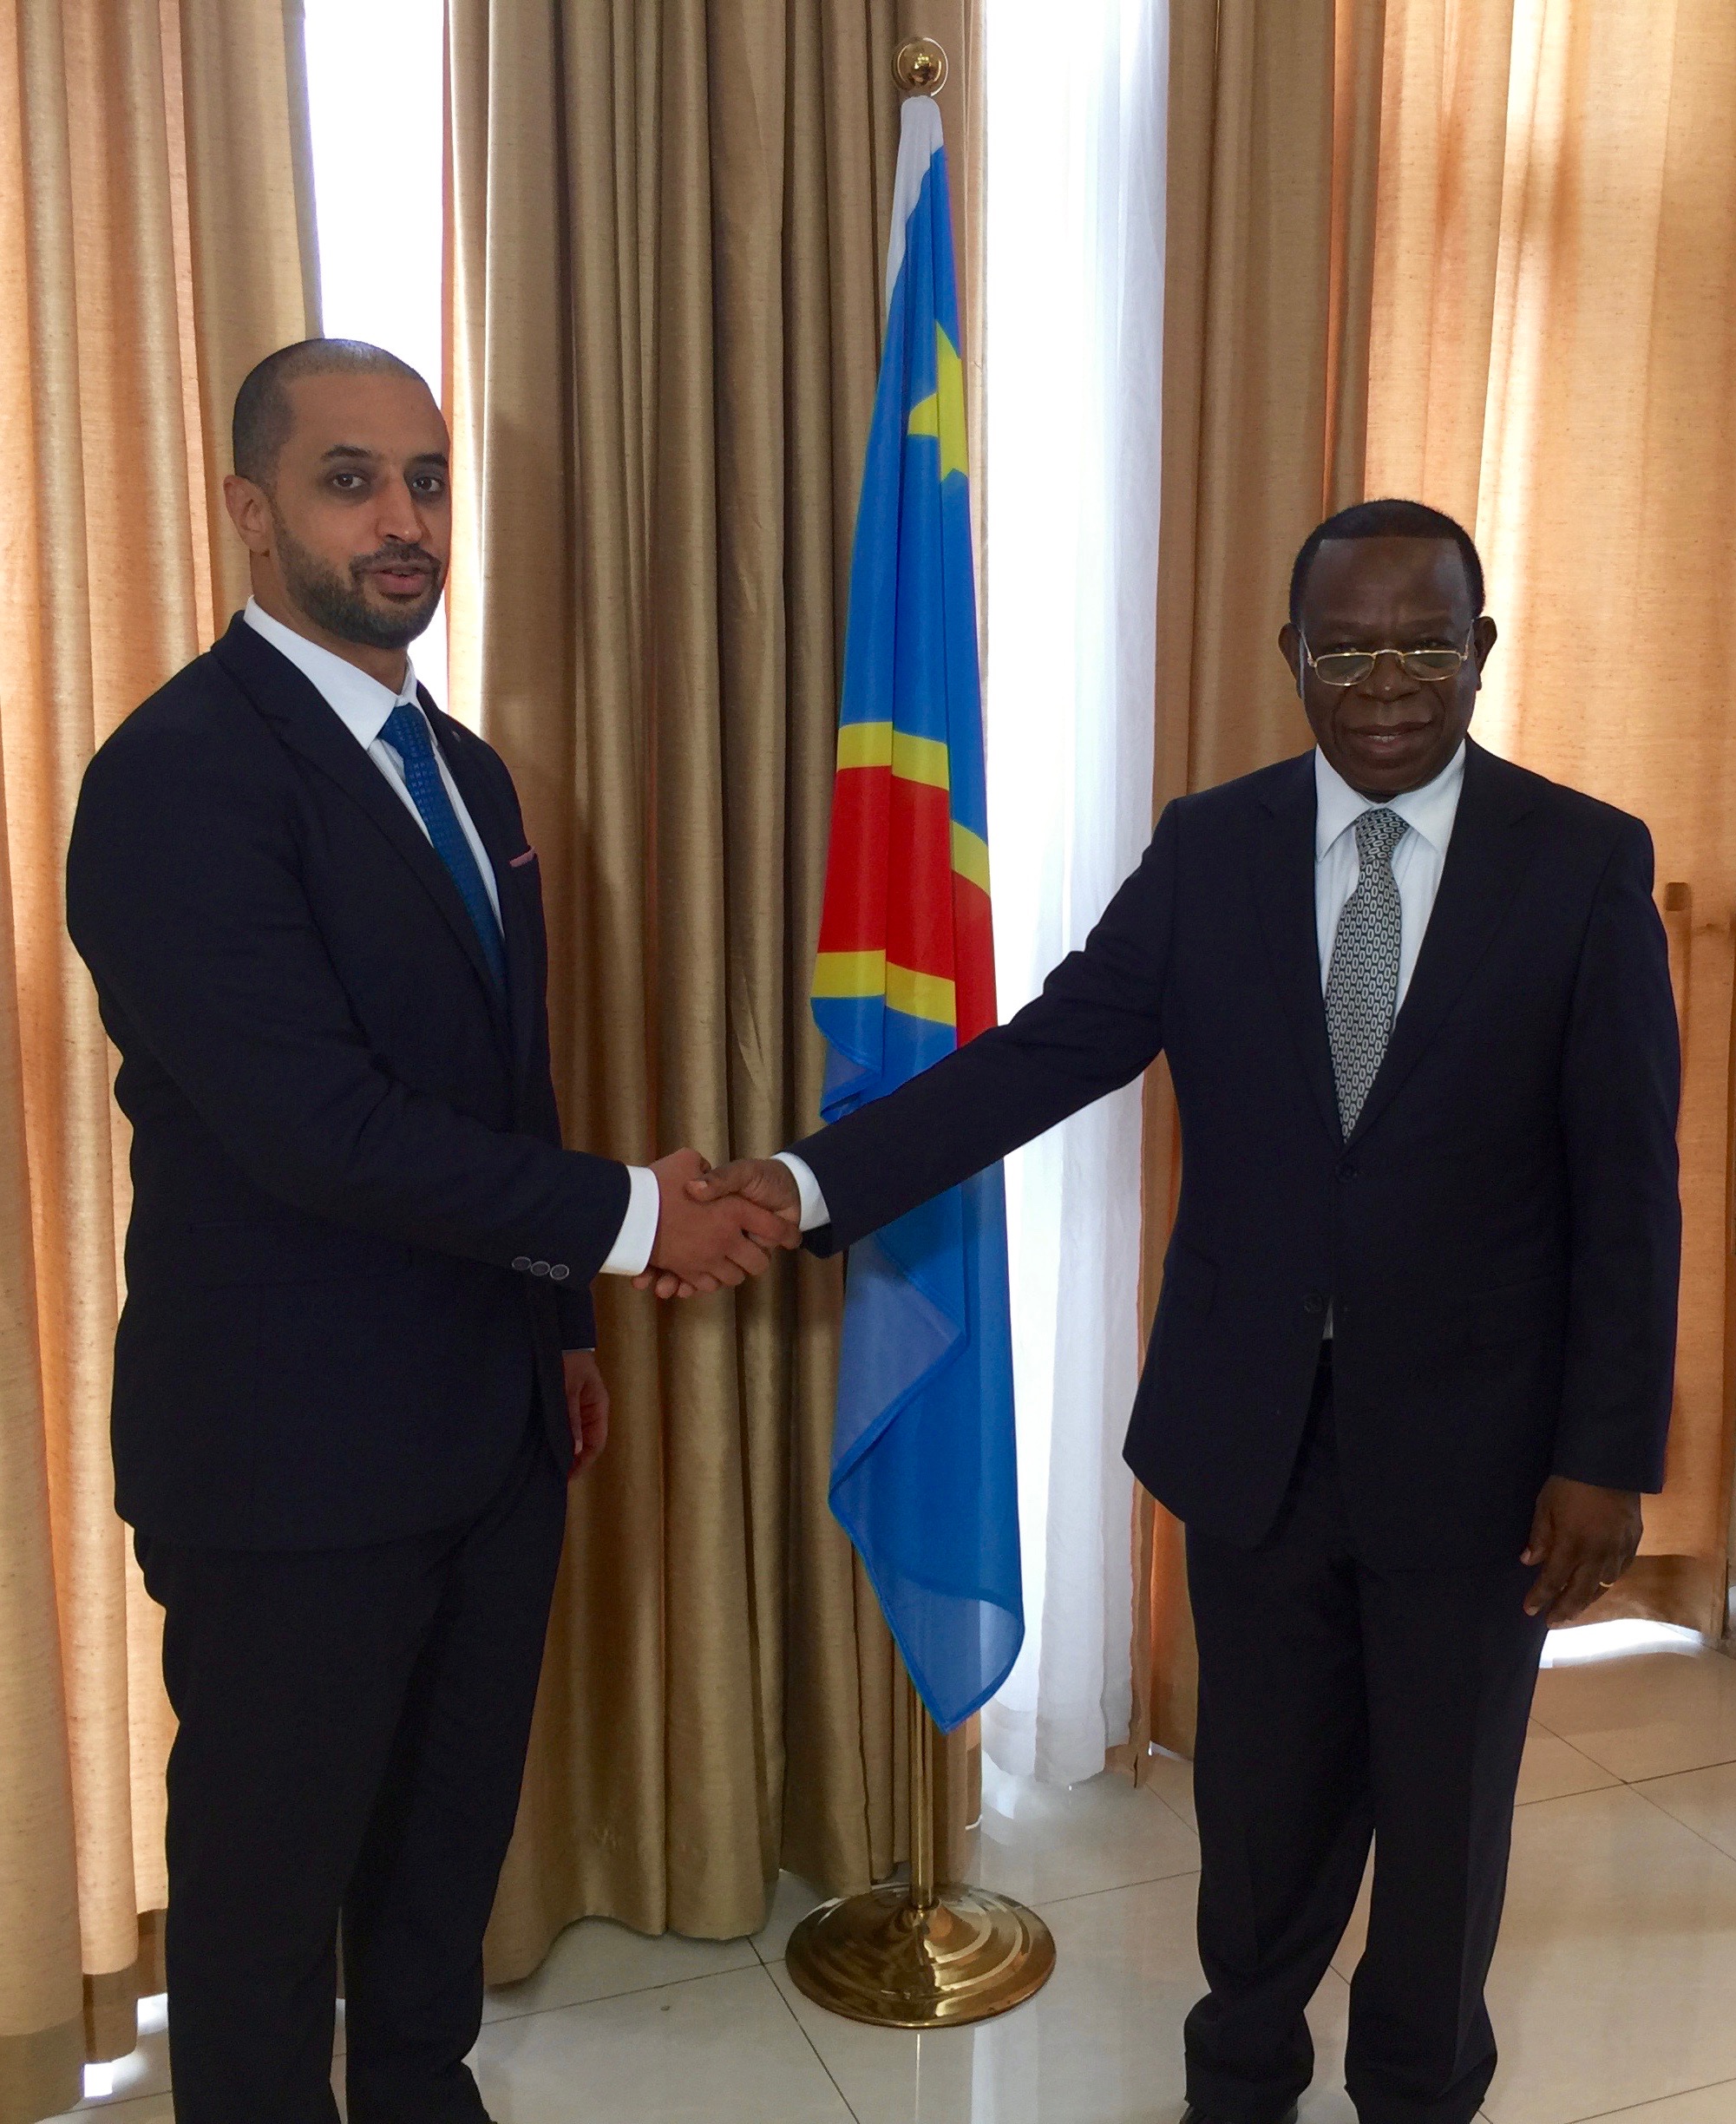 KP Chair Ahmed Bin Sulayem with DRC Minister of Economy H.E. Bahati Lukwebo Modeste